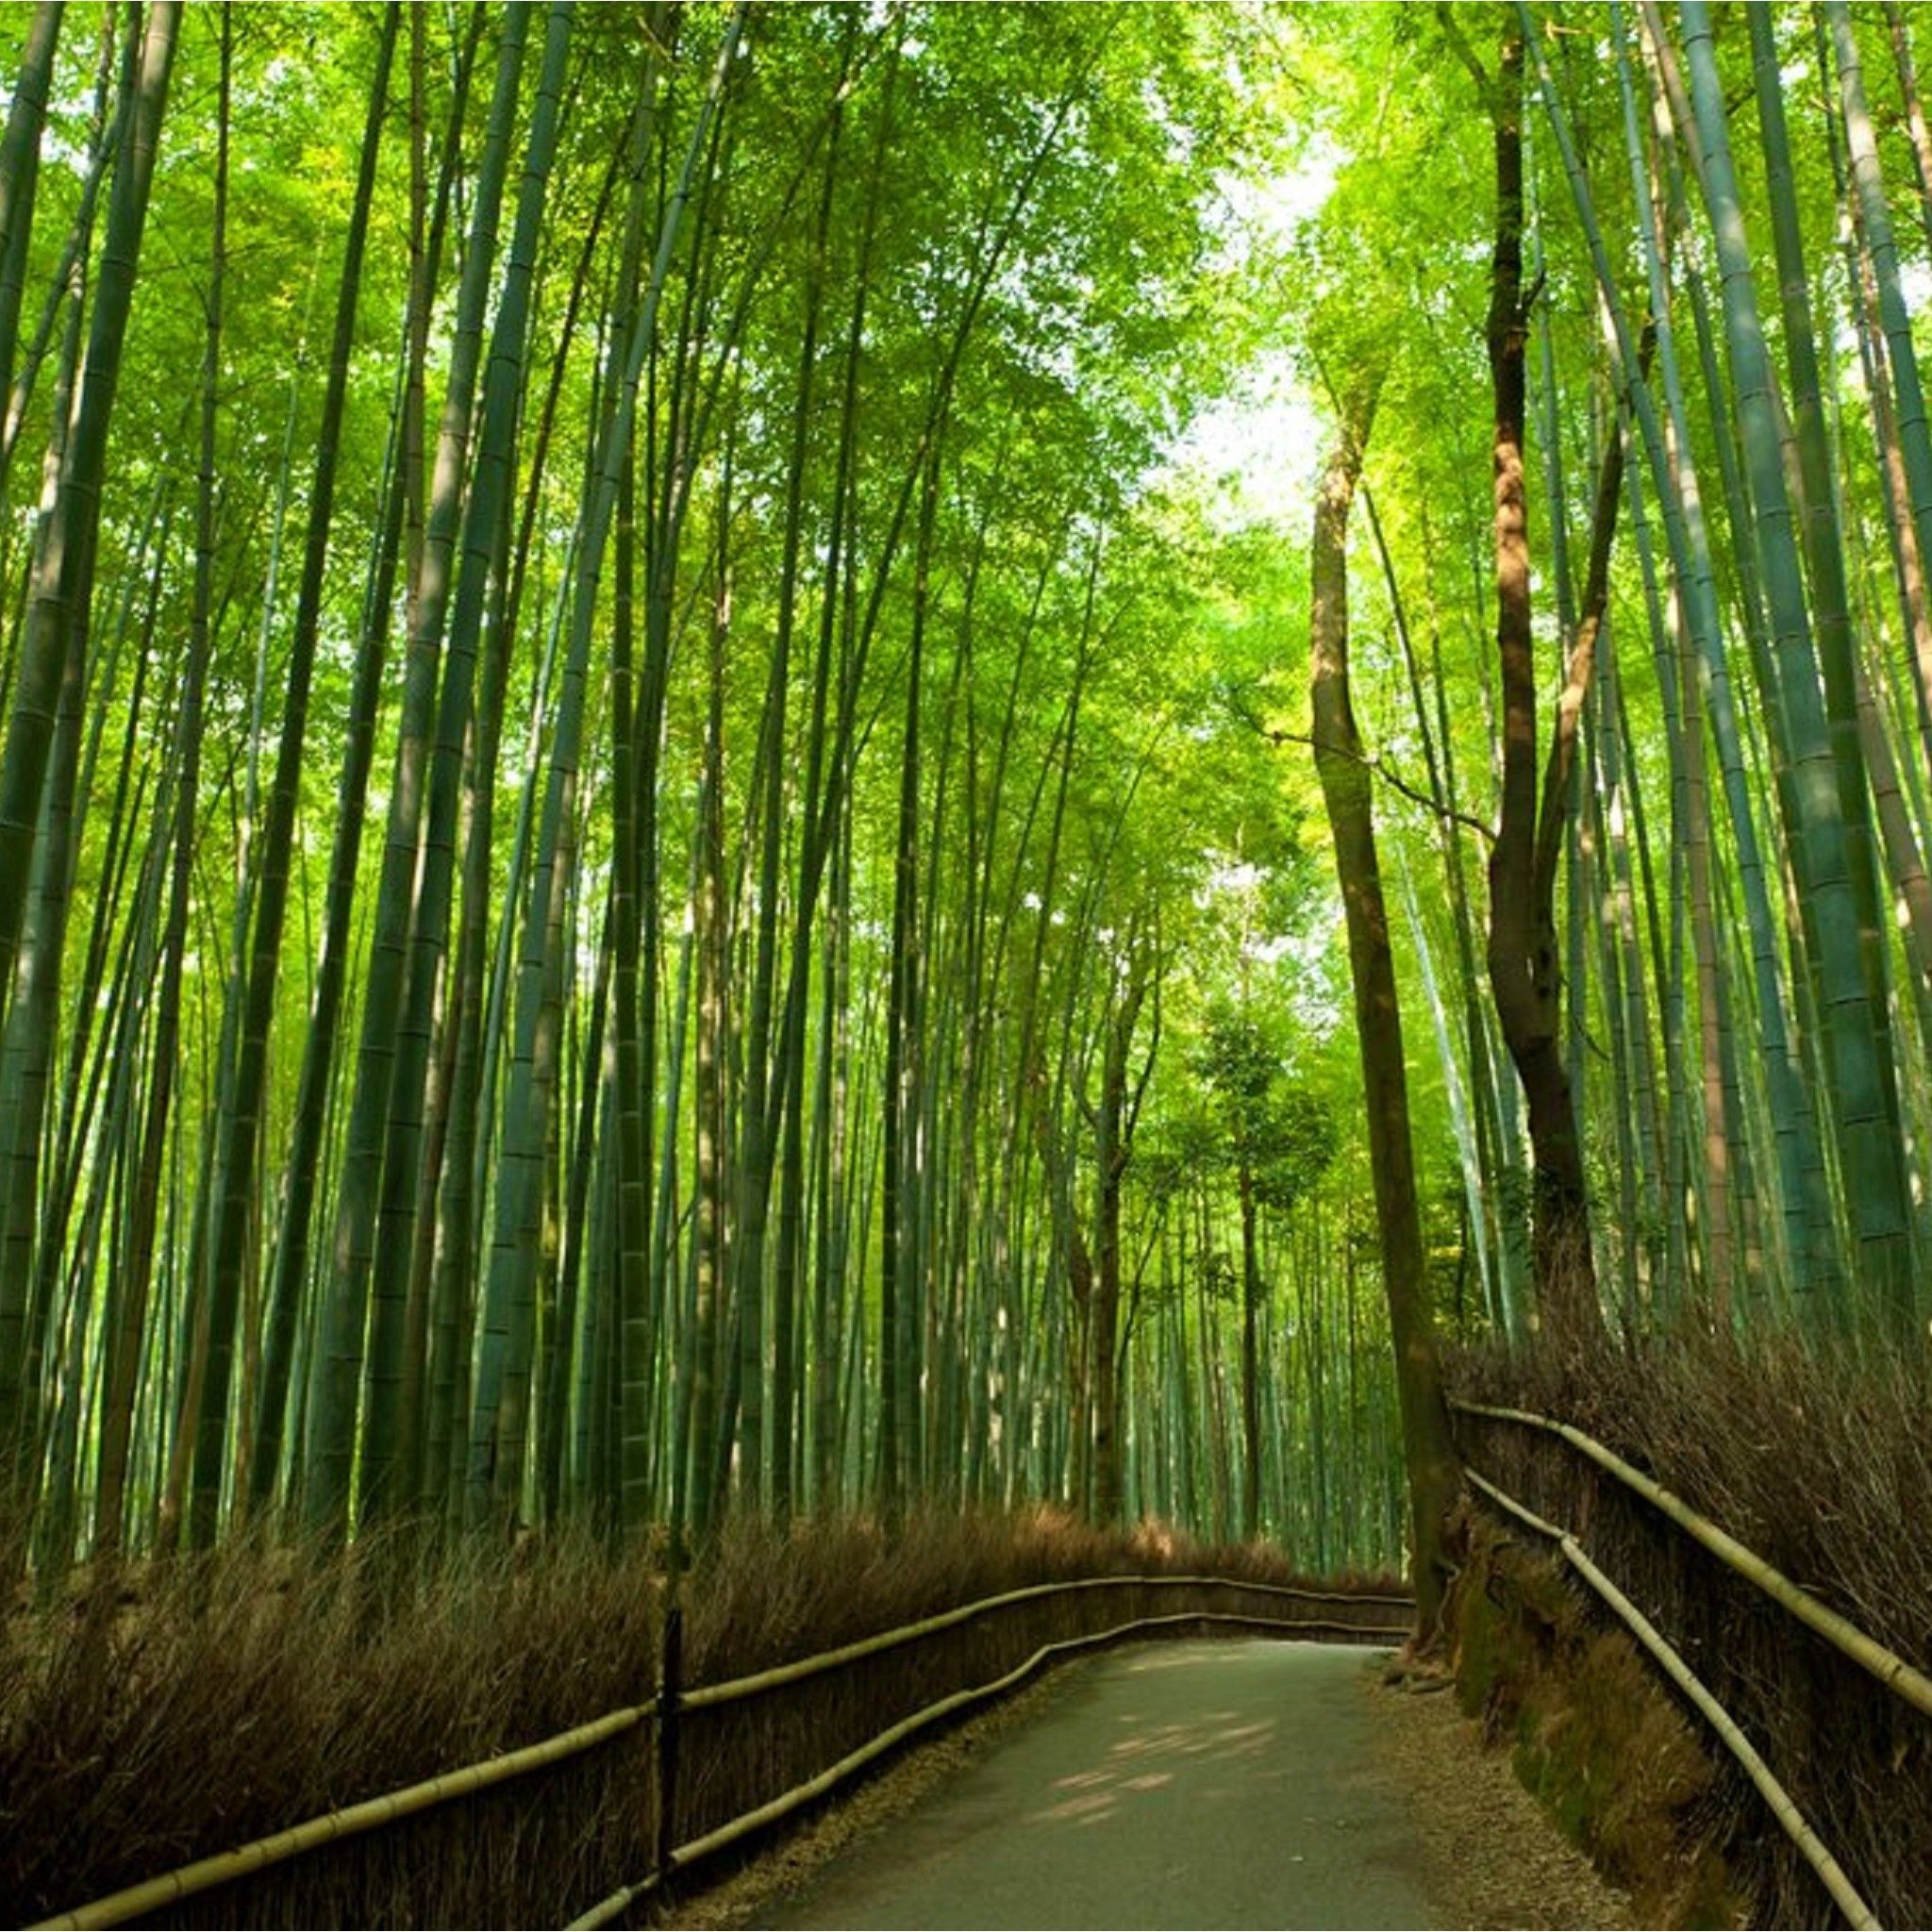 bright green bamboo grove - Tap to see more beautiful traveller road ...